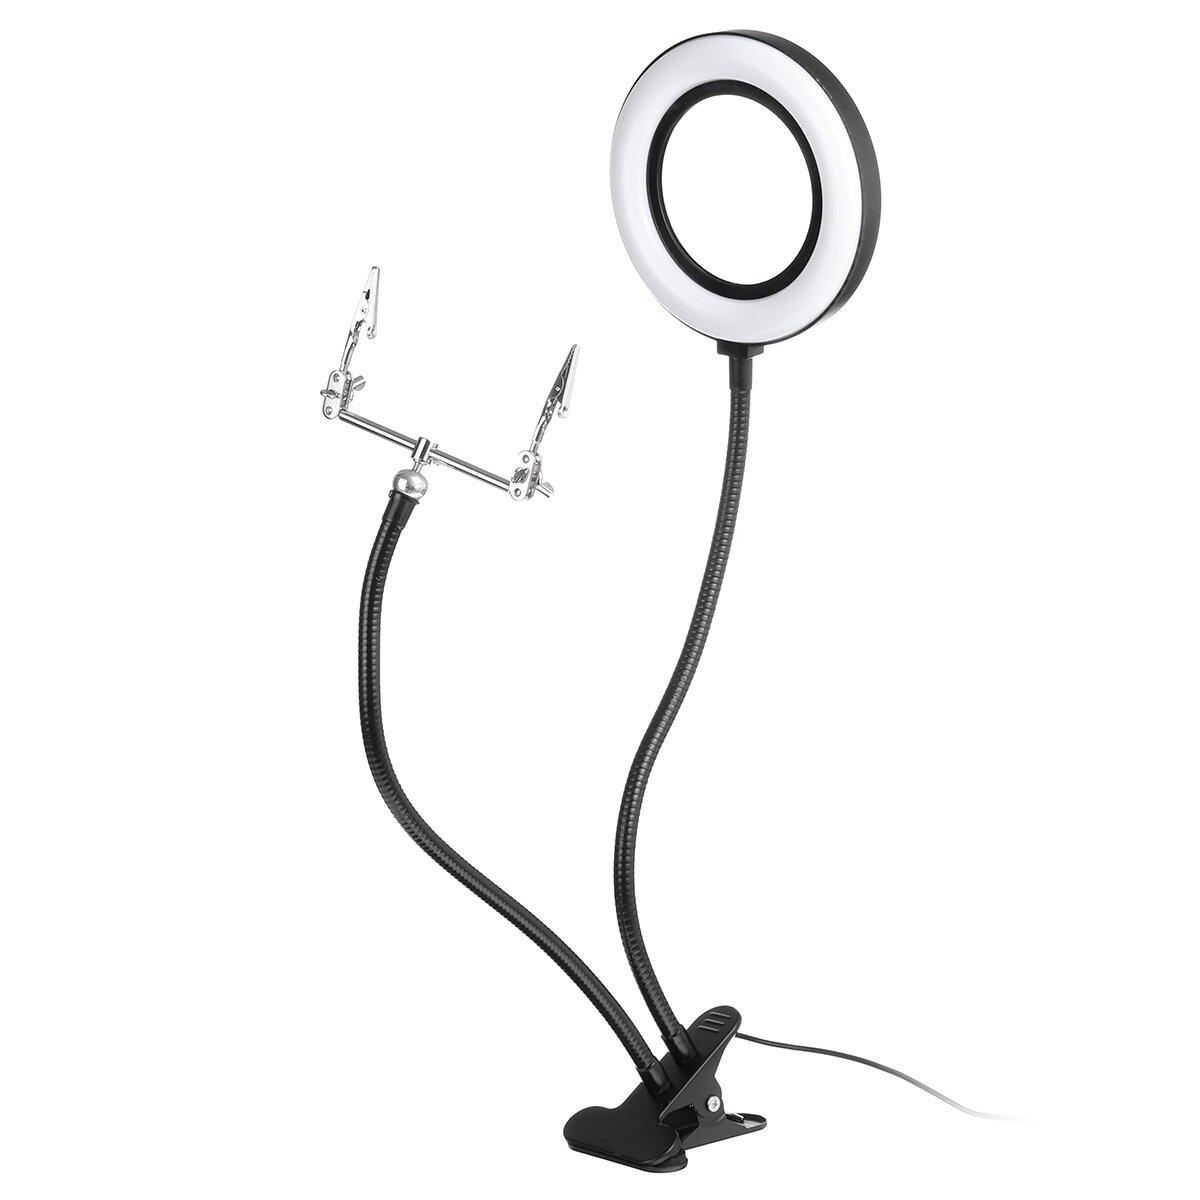 

6 Inches 360° 10X Magnifier LED Light Lamp Desk Magnifying Glass with Clamp USB Charging